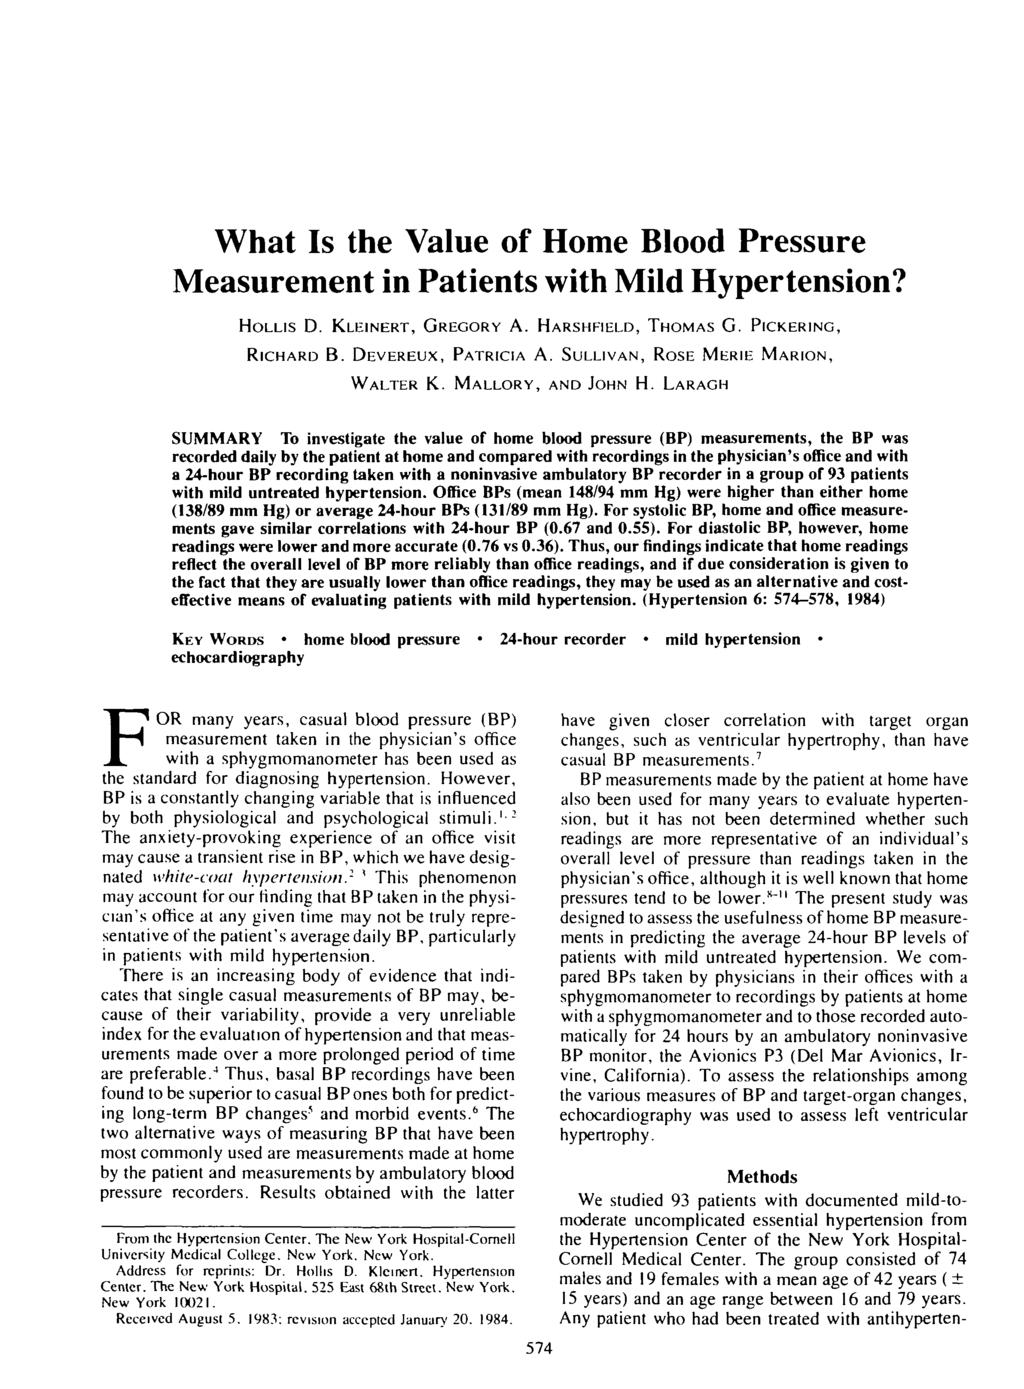 What Is the Value of Home Blood Pressure Measurement in Patients with Mild Hypertension? HOLLIS D. KLEINERT, GREGORY A. HARSHFIELD, THOMAS G. PICKERING, RICHARD B. DEVEREUX, PATRICIA A.